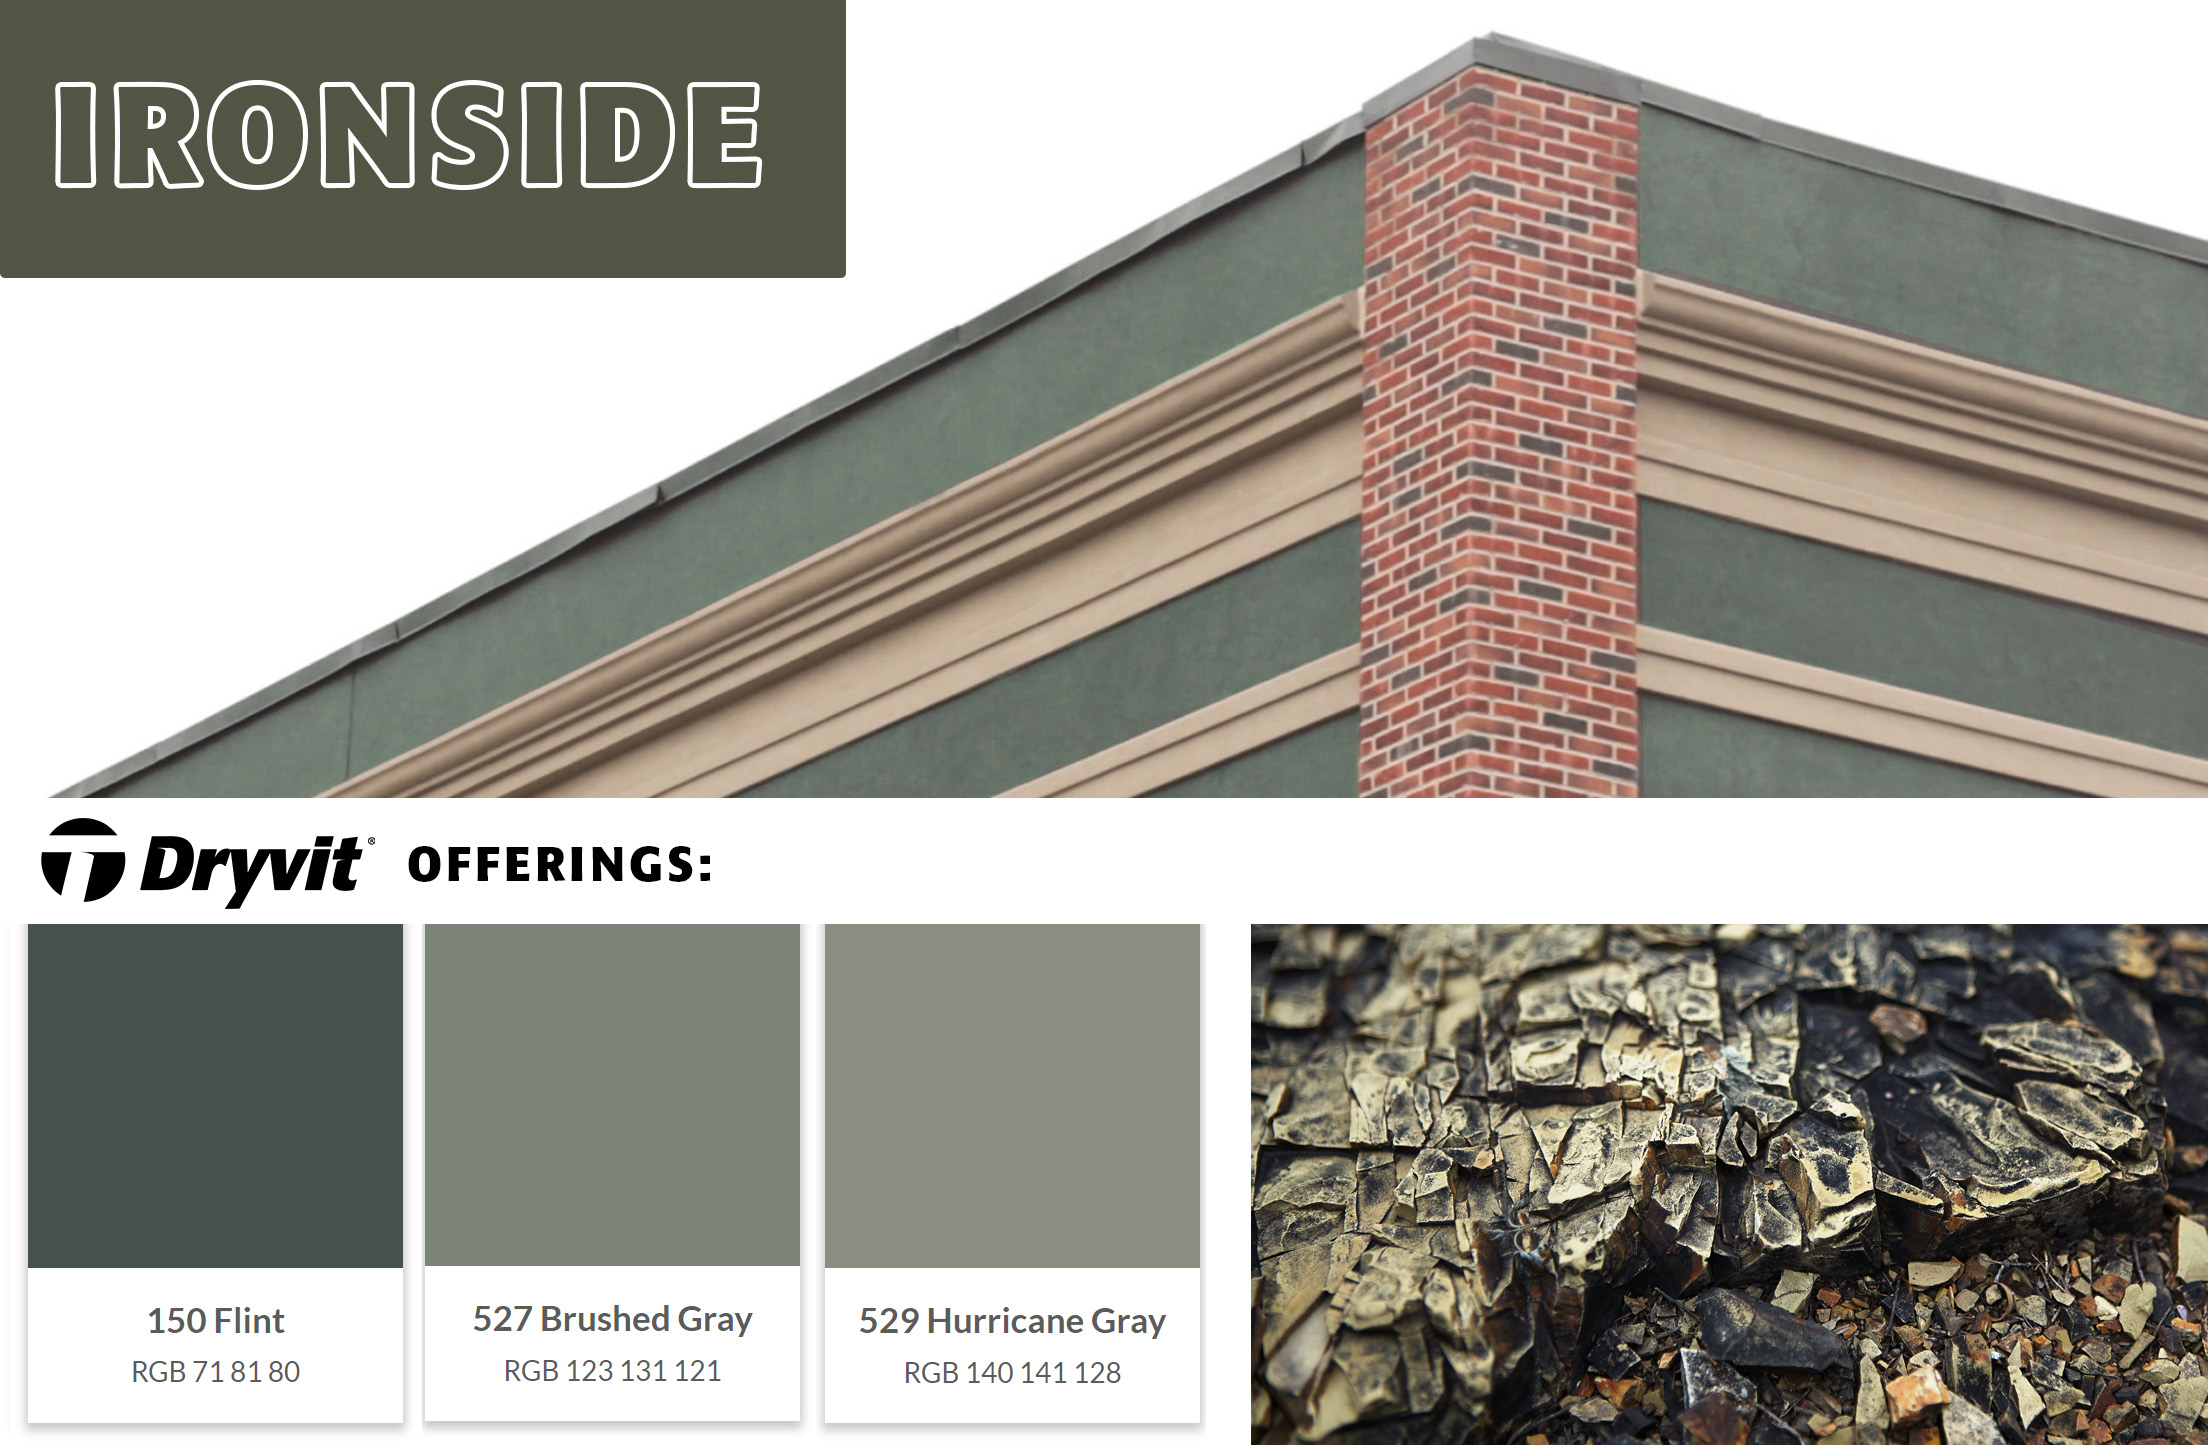 a collage of images showing a deep gray green. Images include iron ore and the top part of a strip mall commercial building façade in a deep gray green